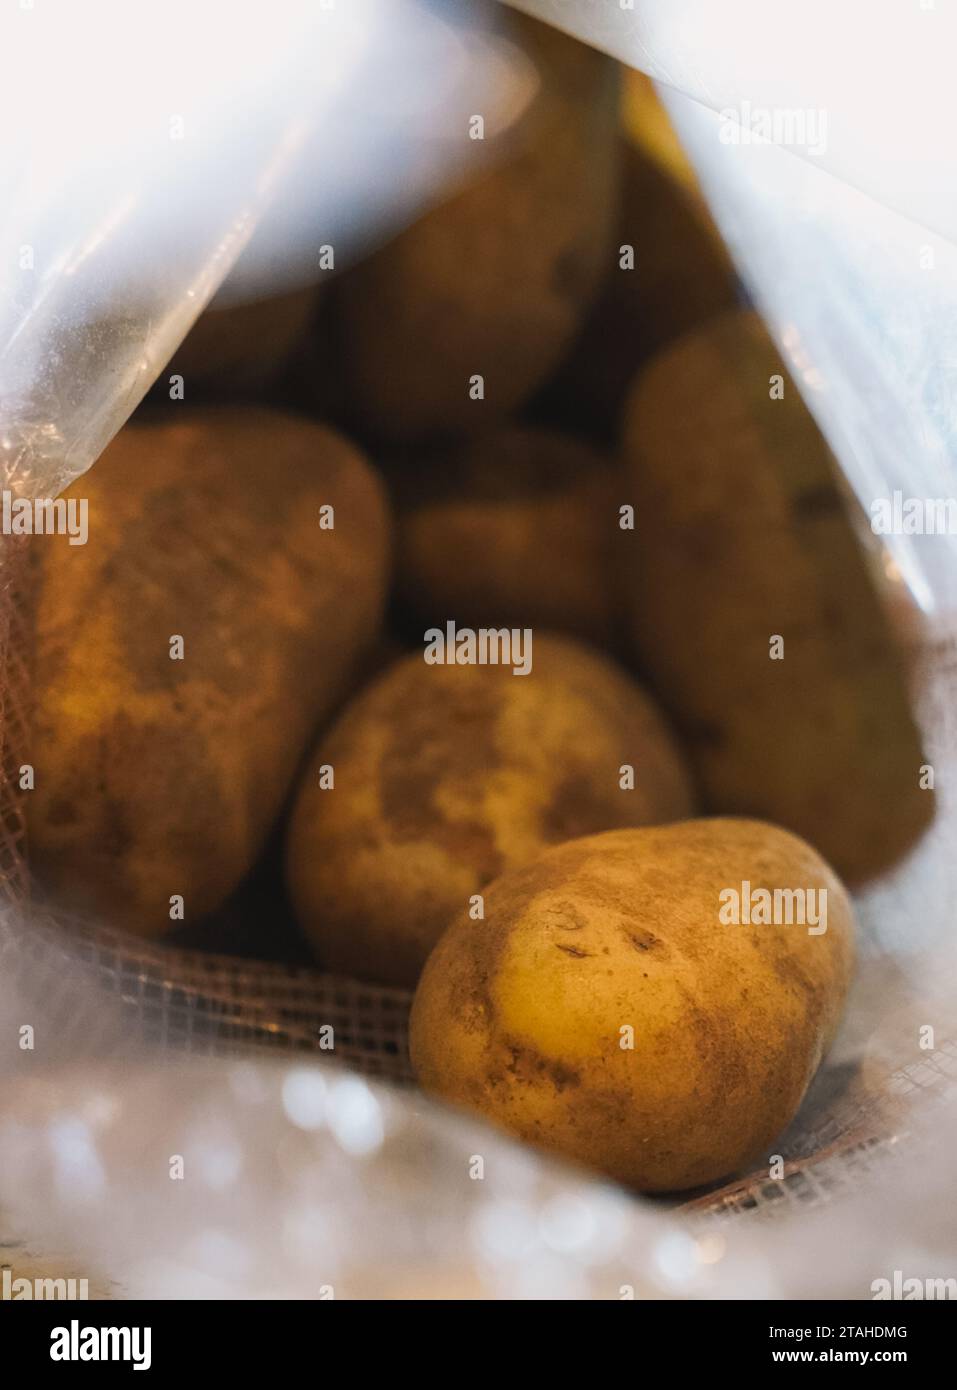 Inside view of a bag of potatoes Stock Photo